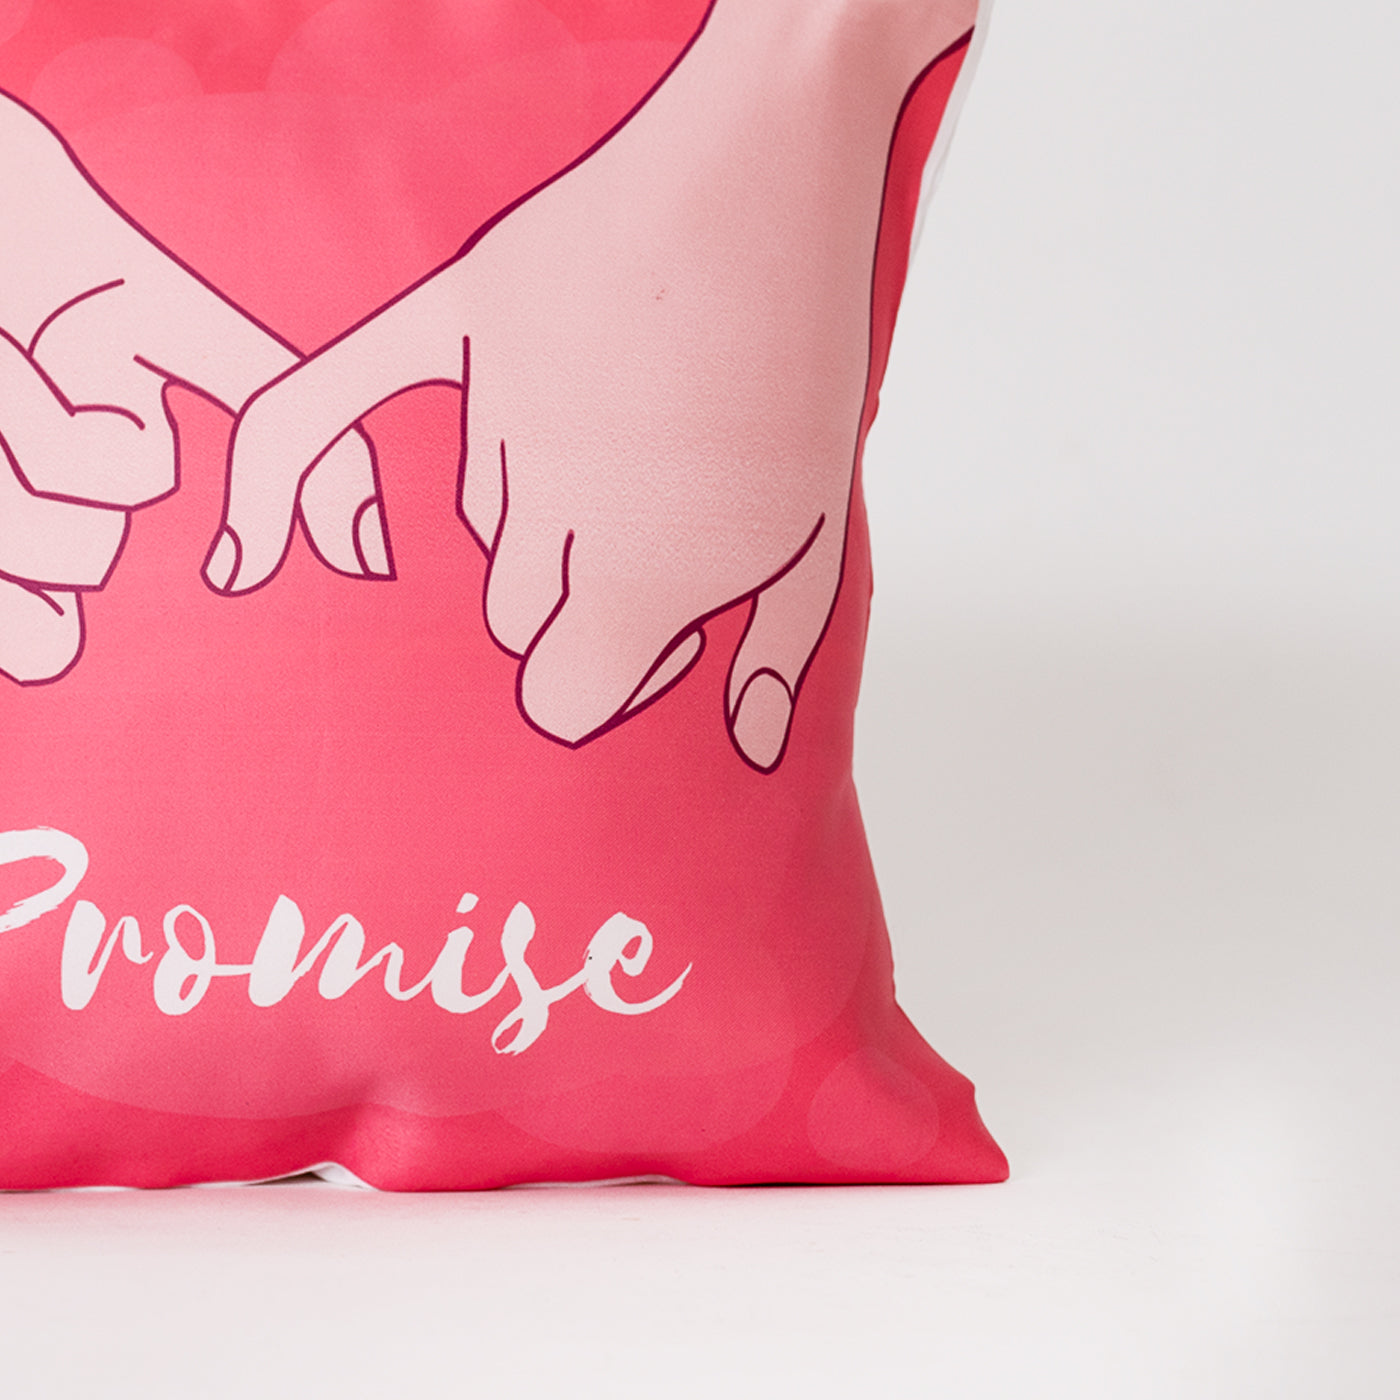 Printed Cushion Promise Day Special Unique Birthday, Wedding, Anniversary Gift